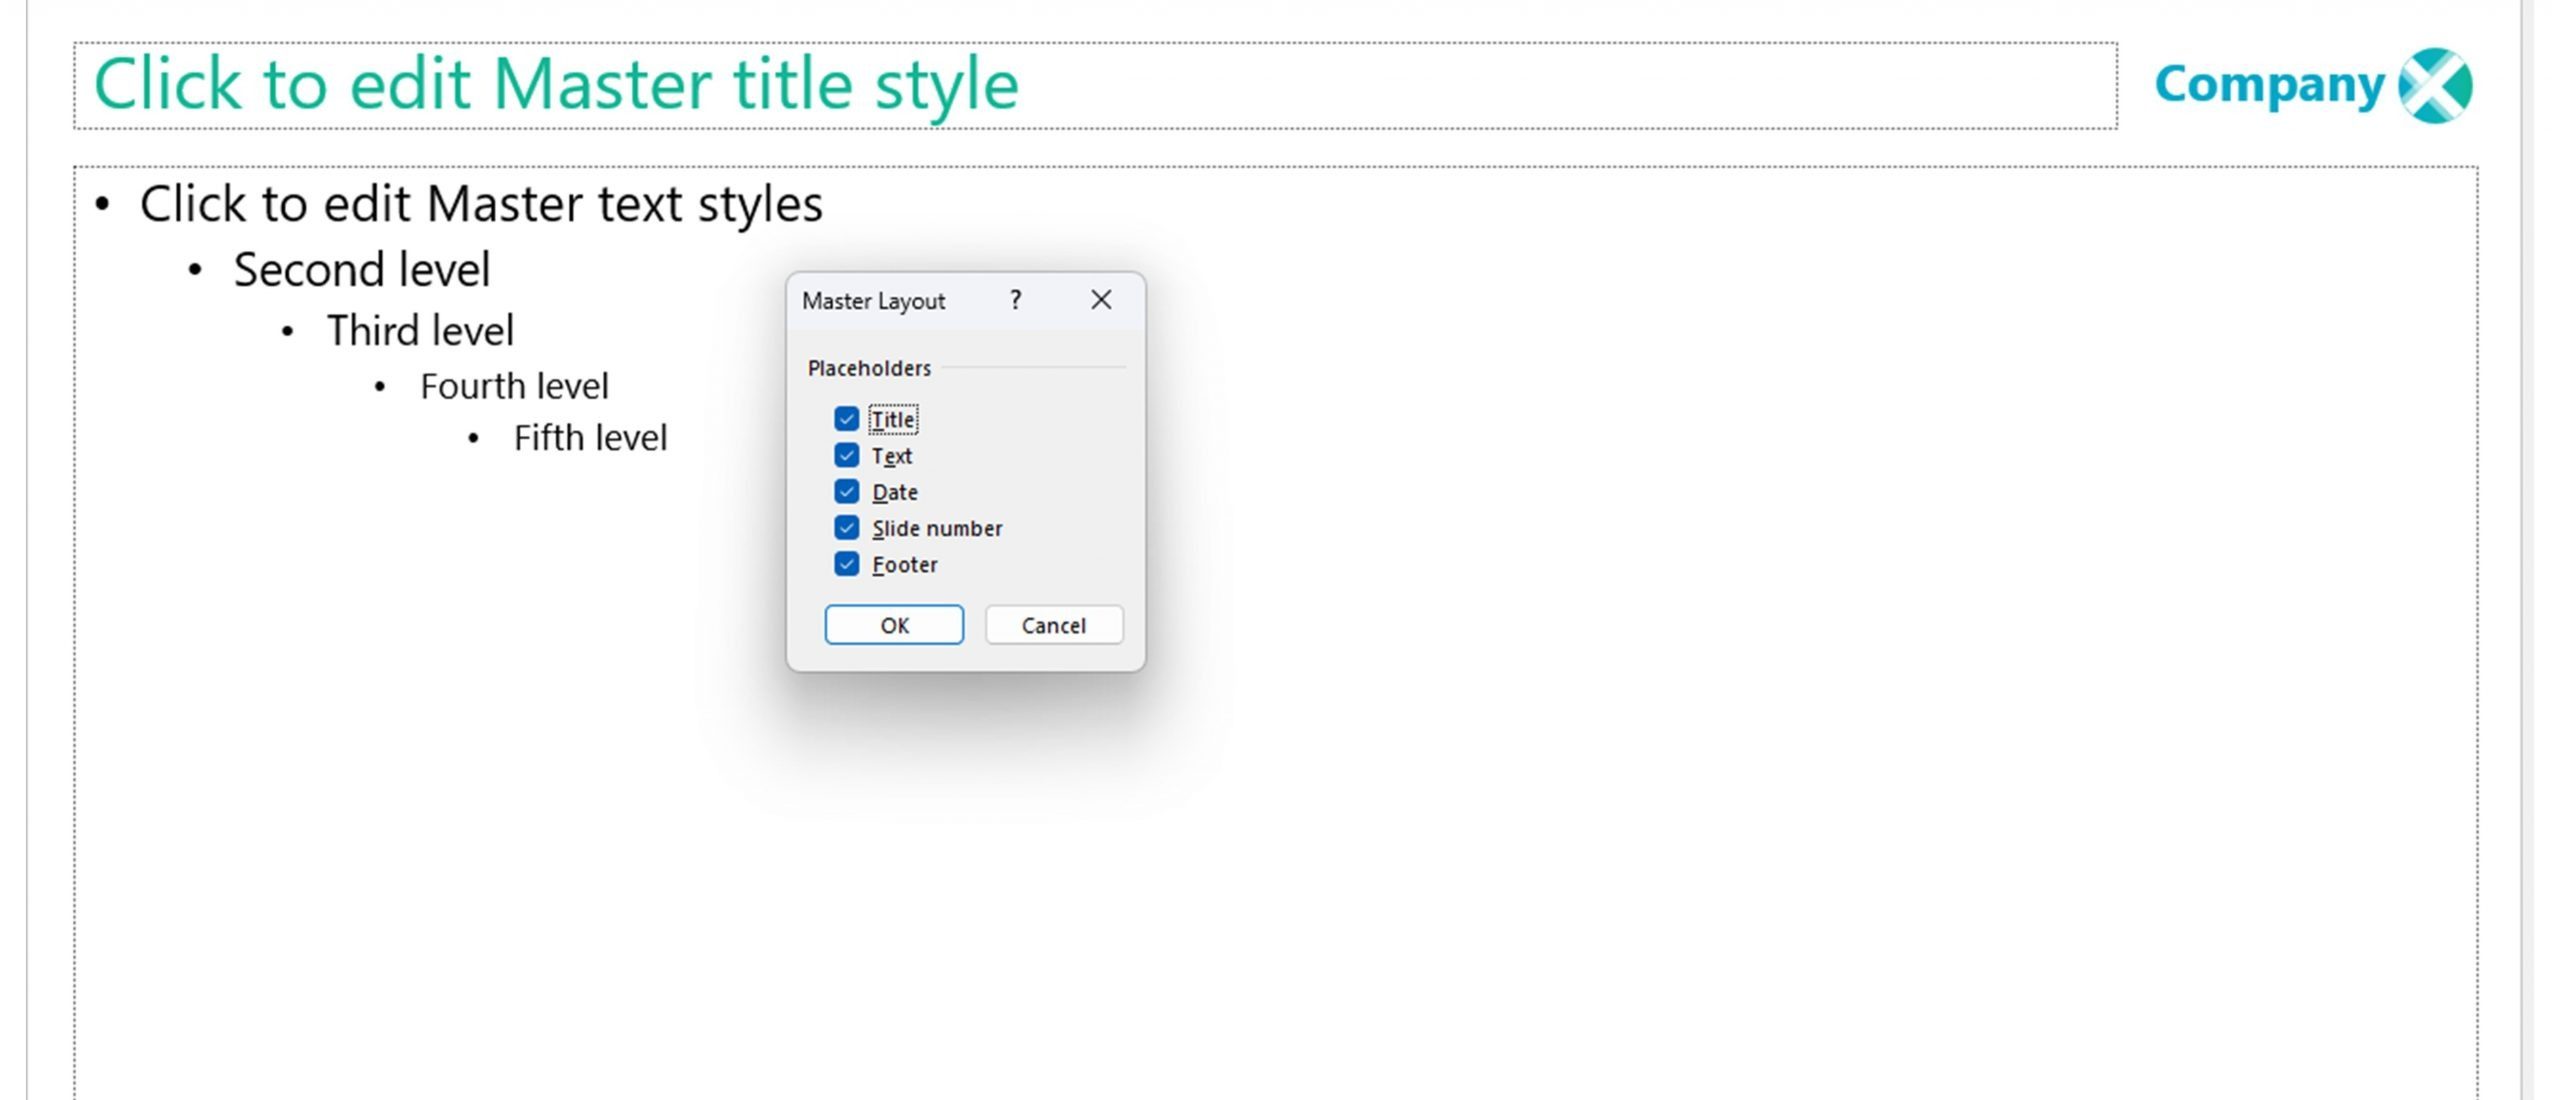 Screenshot of the Master Layout pop up showing options with check boxes: Title, Text, Date, Slide number, Footer